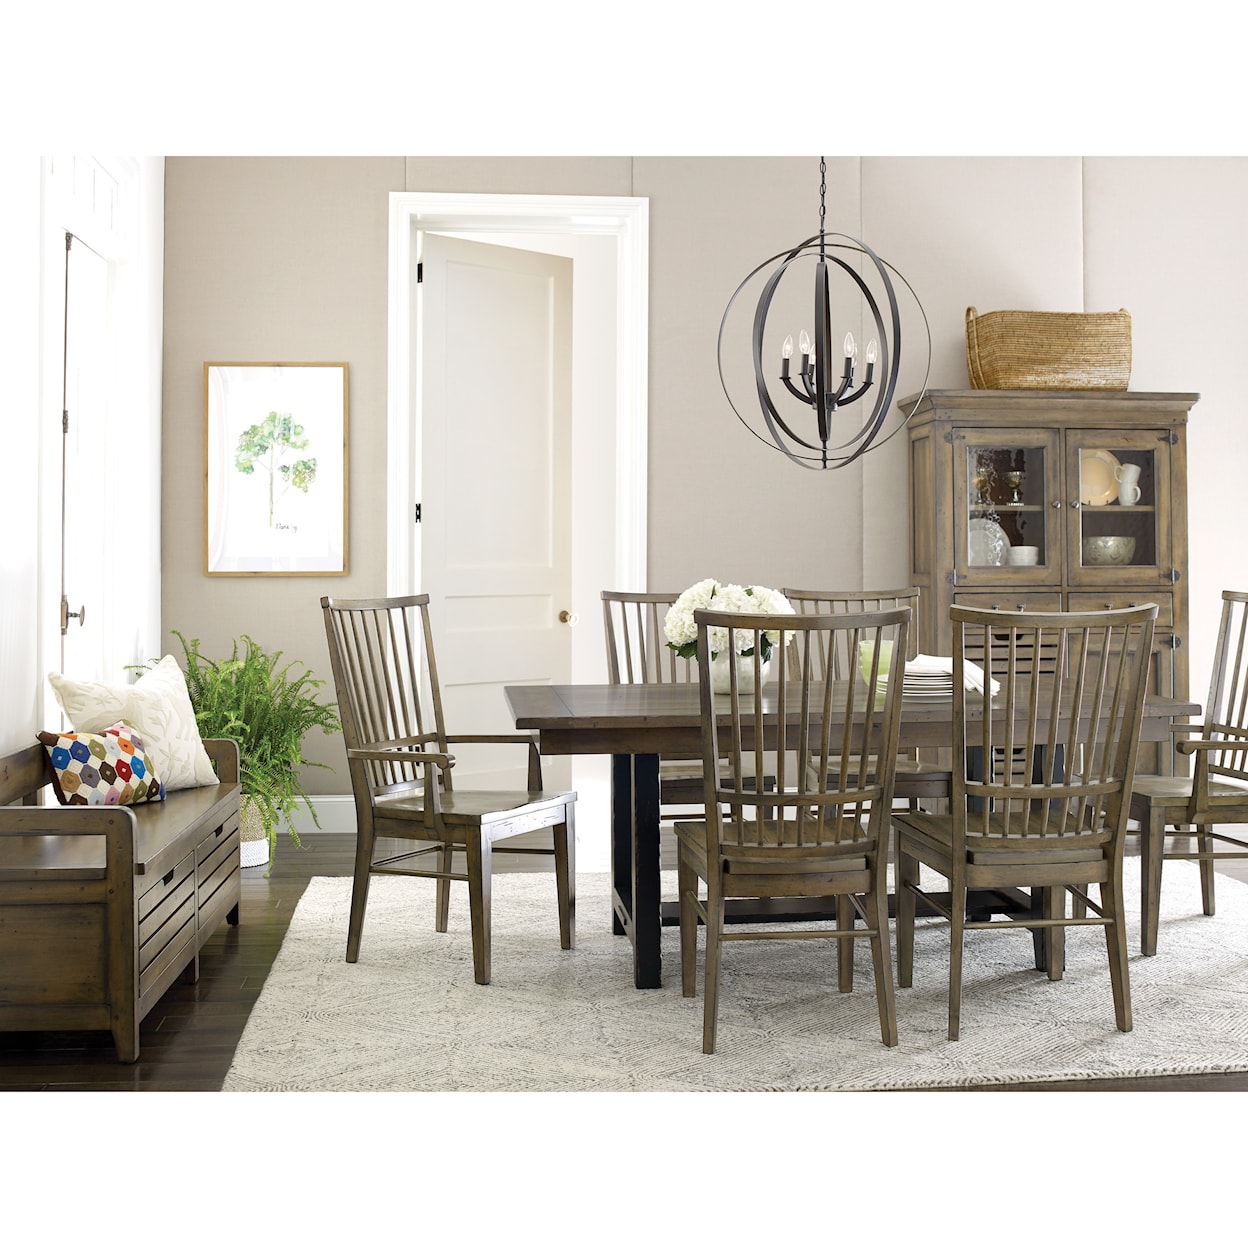 Kincaid Furniture Mill House Formal Dining Room Group